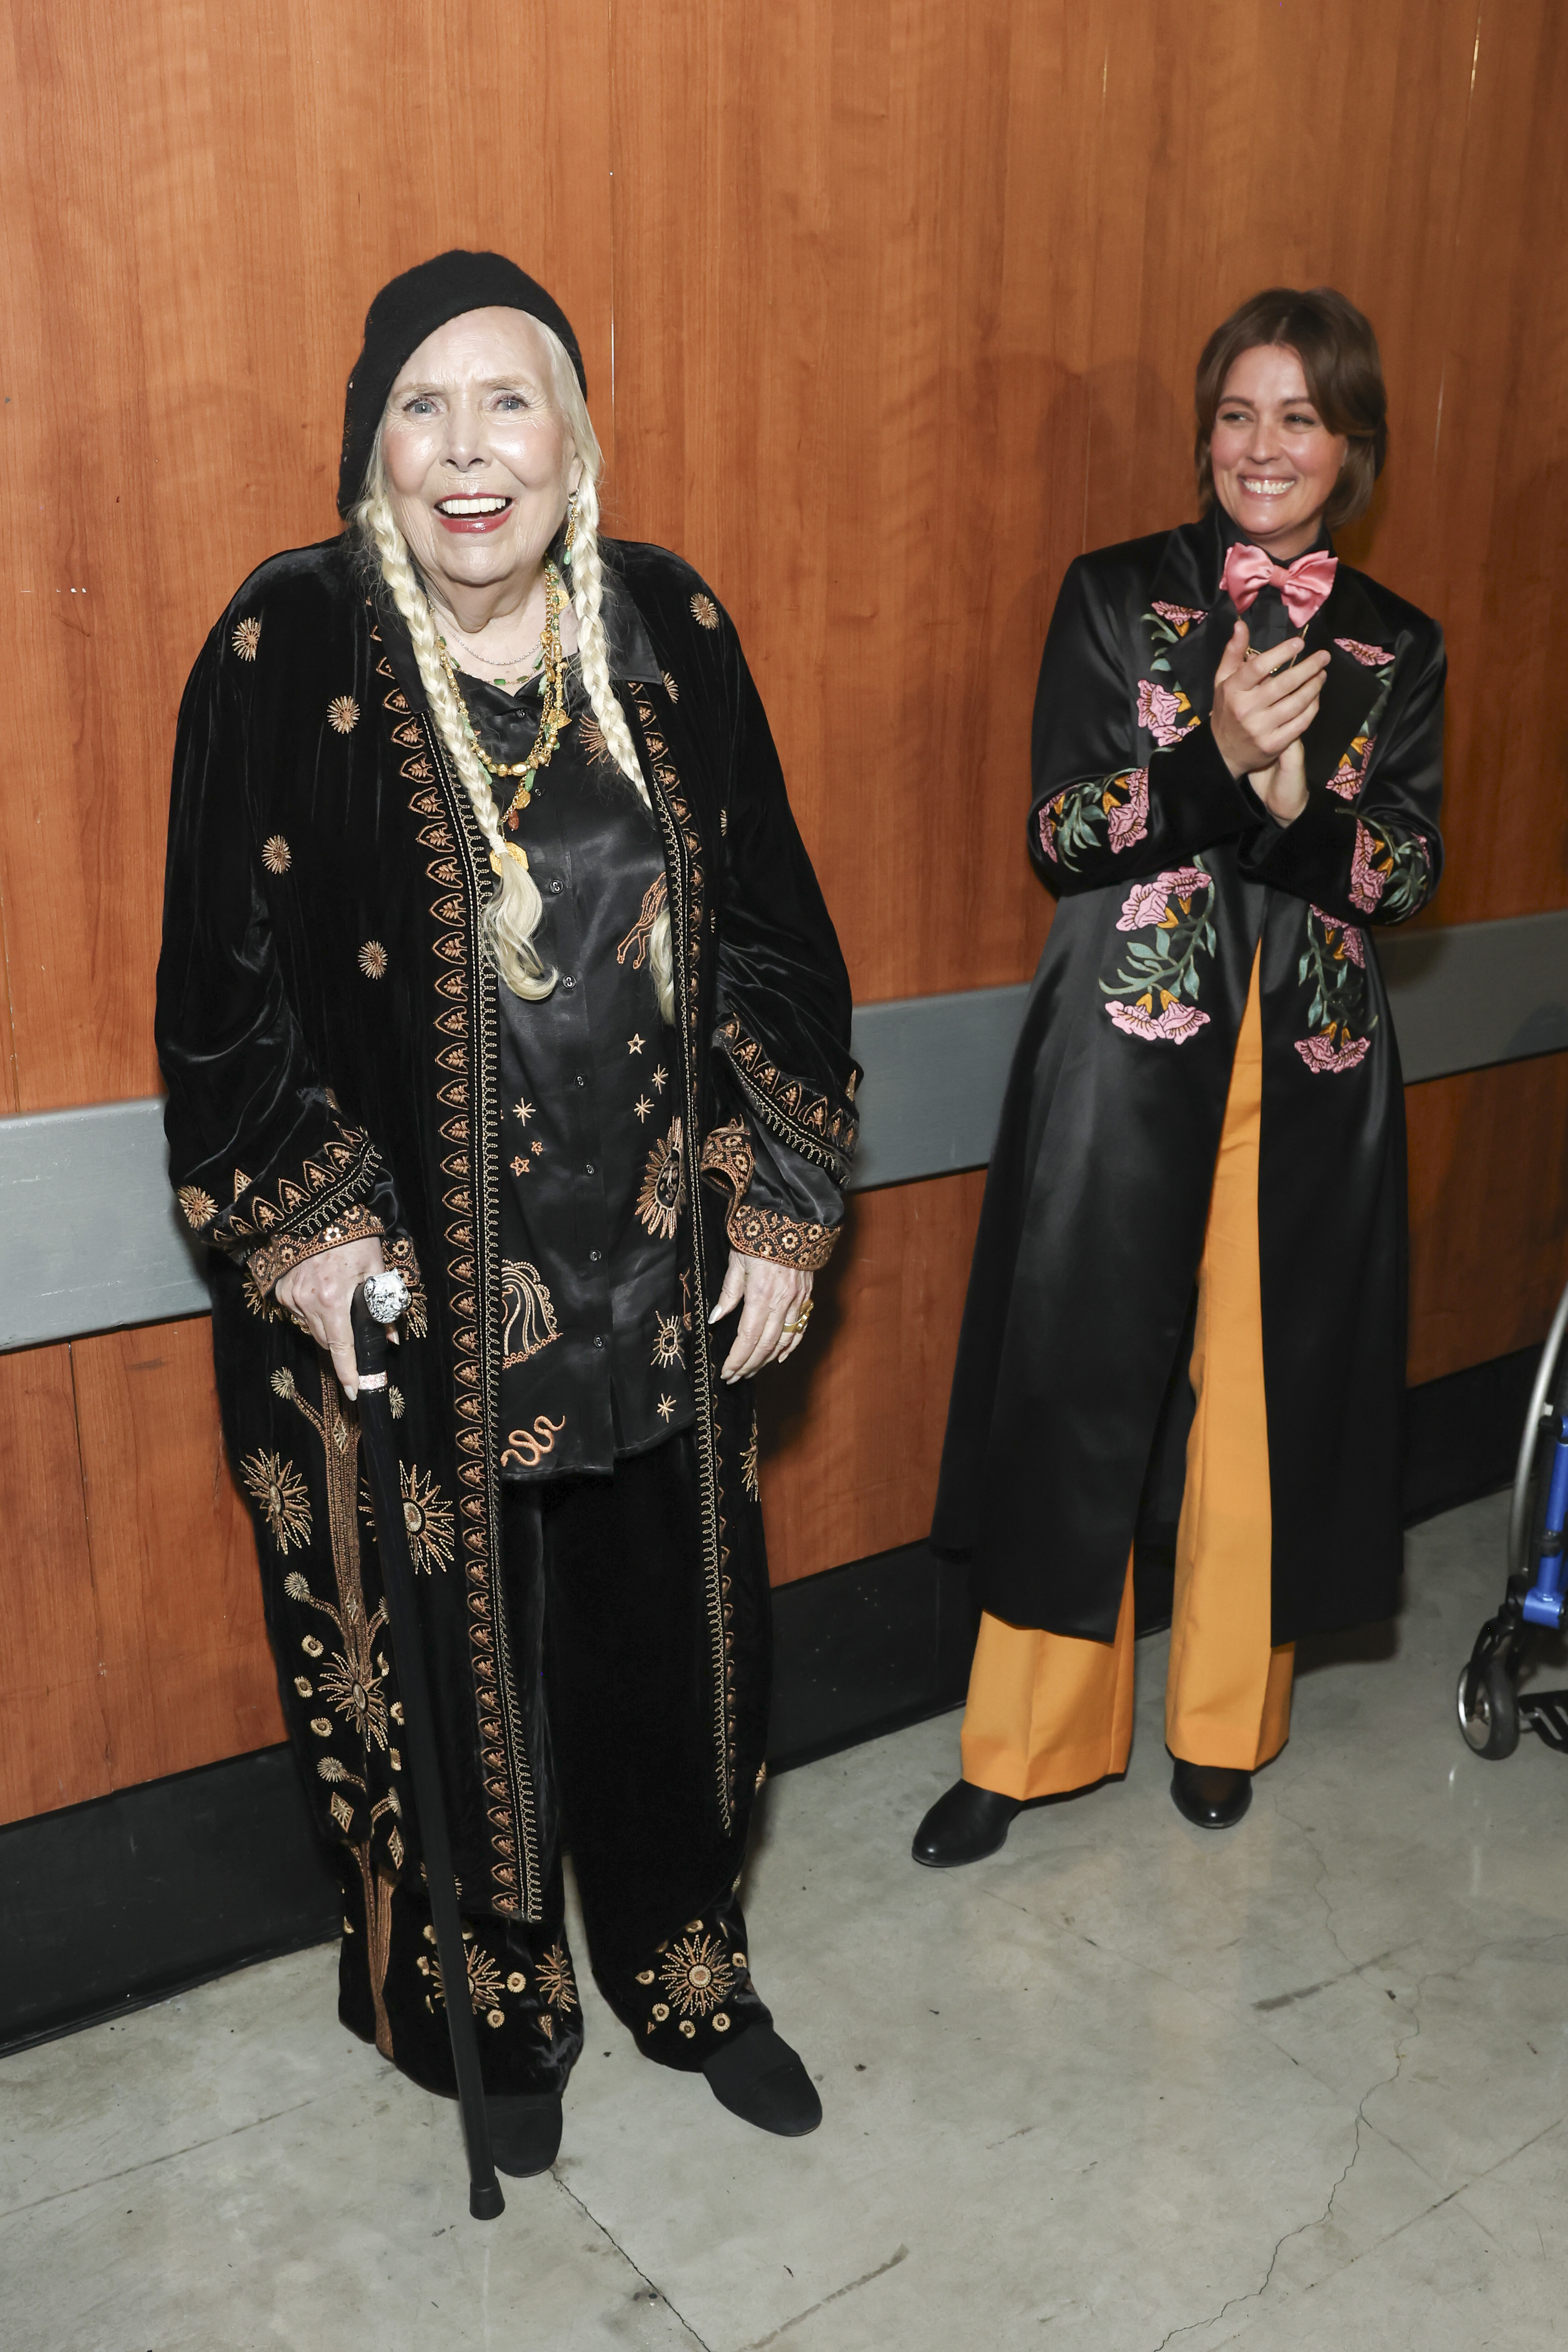 Joni Mitchell, in an ornate black outfit with gold designs and a hat, stands with a cane next to Brandi Carlile, who wears a black coat with floral embroidery and yellow pants